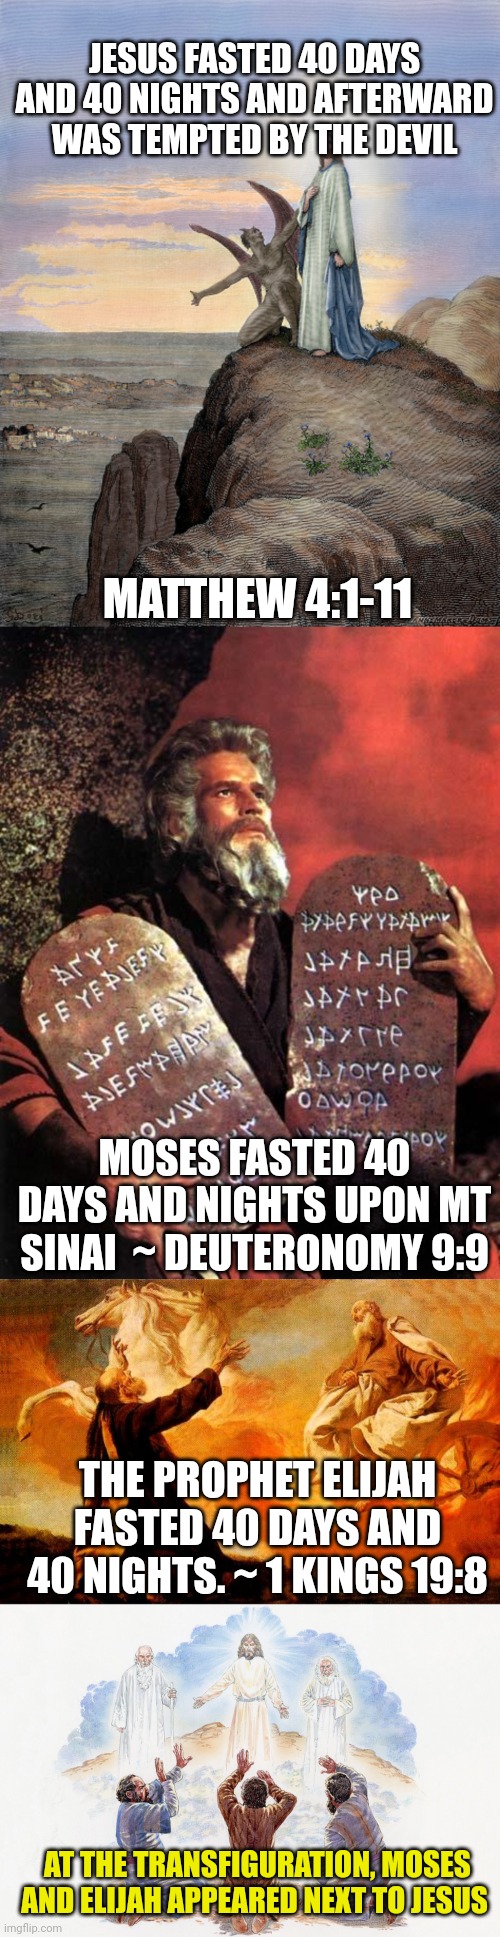 JESUS FASTED 40 DAYS AND 40 NIGHTS AND AFTERWARD WAS TEMPTED BY THE DEVIL; MATTHEW 4:1-11; MOSES FASTED 40 DAYS AND NIGHTS UPON MT SINAI  ~ DEUTERONOMY 9:9; THE PROPHET ELIJAH FASTED 40 DAYS AND 40 NIGHTS. ~ 1 KINGS 19:8; AT THE TRANSFIGURATION, MOSES AND ELIJAH APPEARED NEXT TO JESUS | image tagged in jesus being tempted,moses,elijah chariot of fire,transfiguration | made w/ Imgflip meme maker